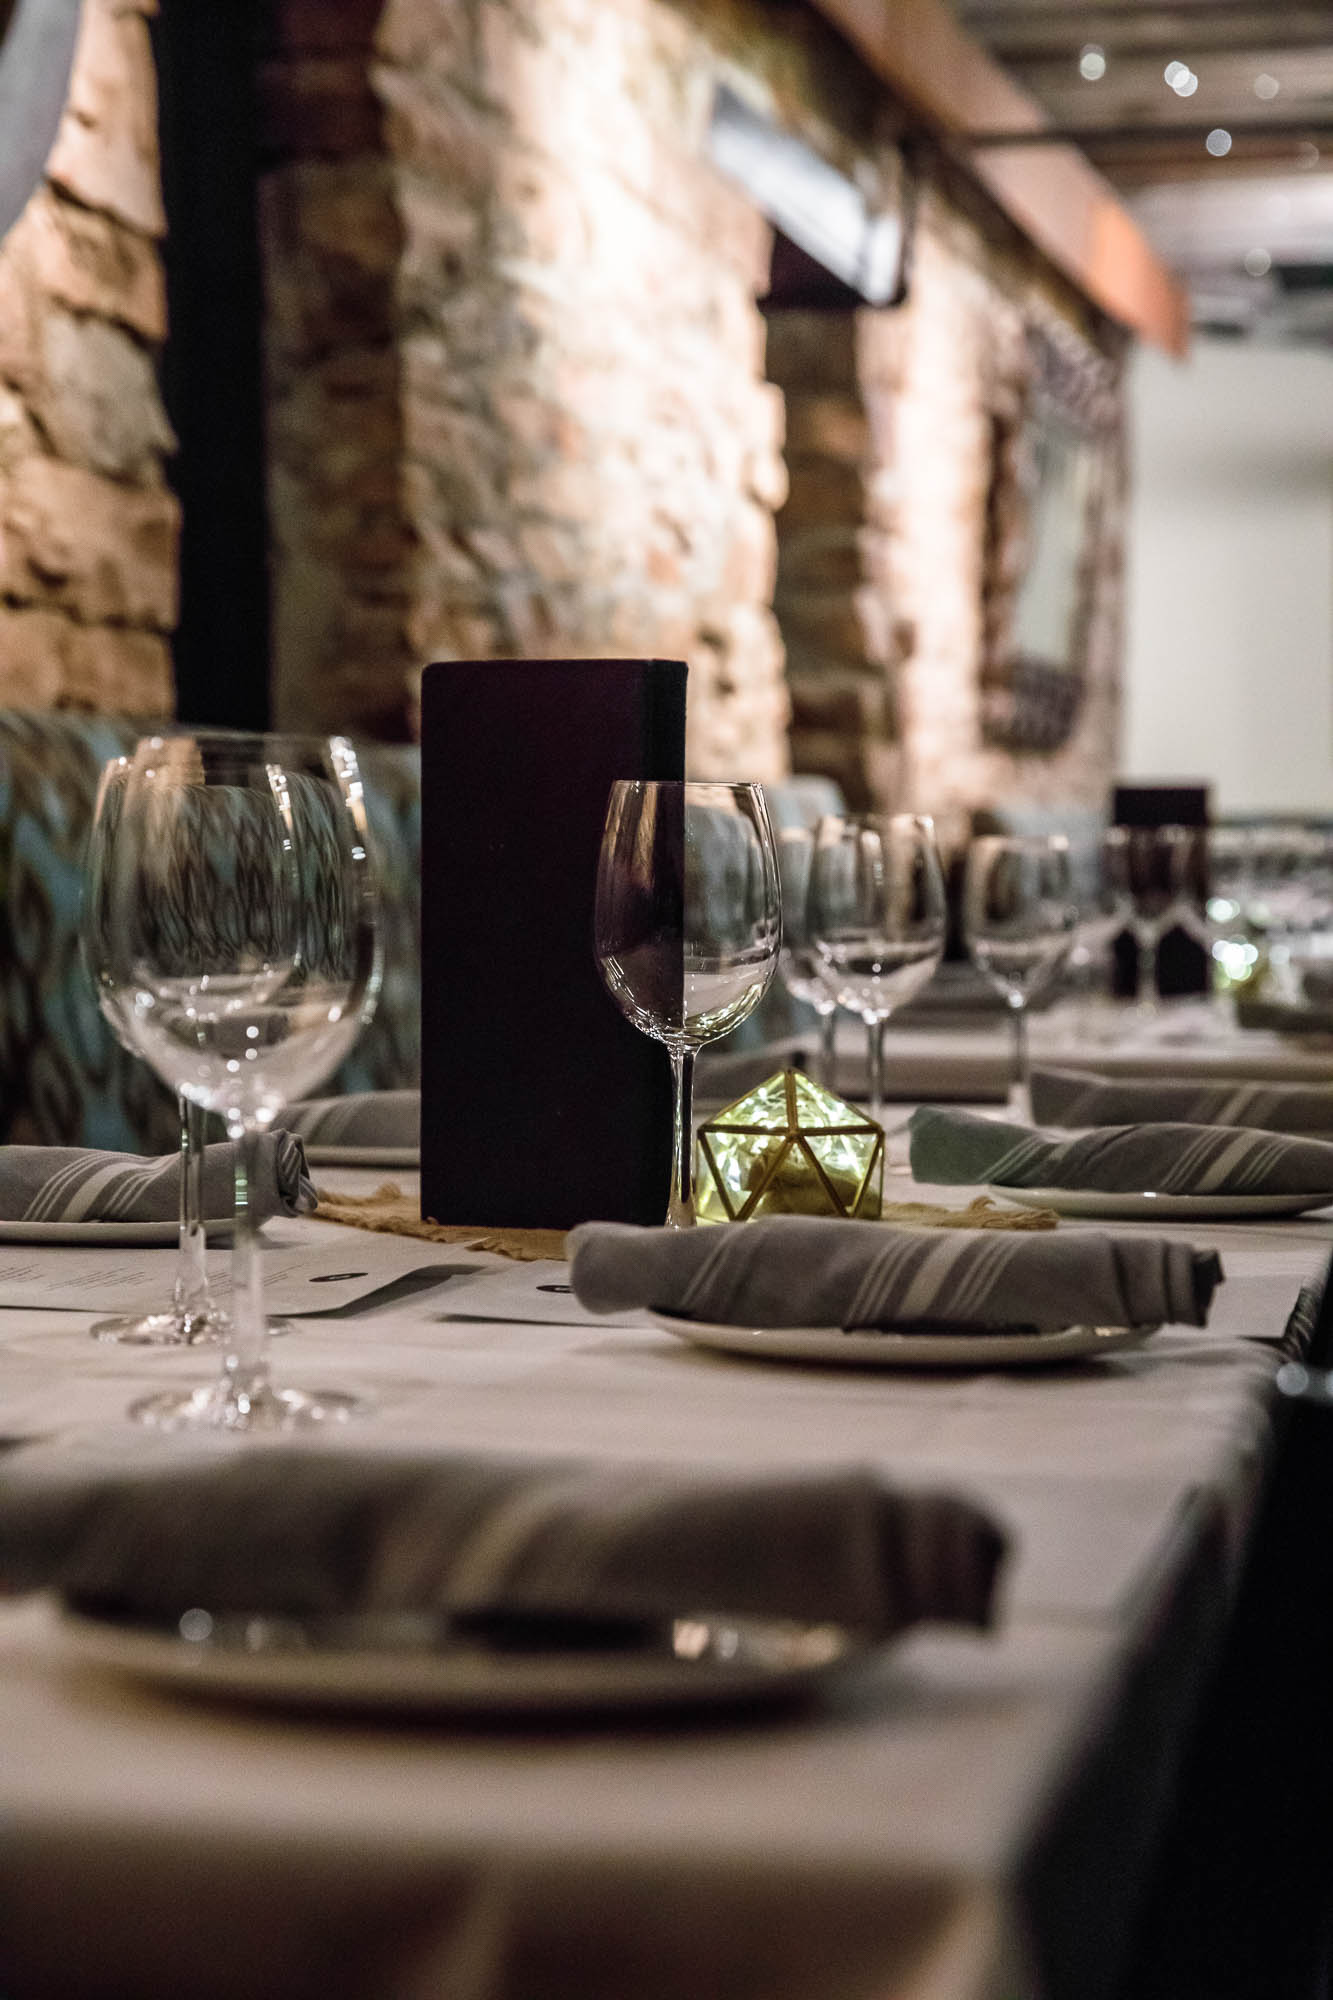 Cellar room, set dining tables decorated with greenery and lit candles